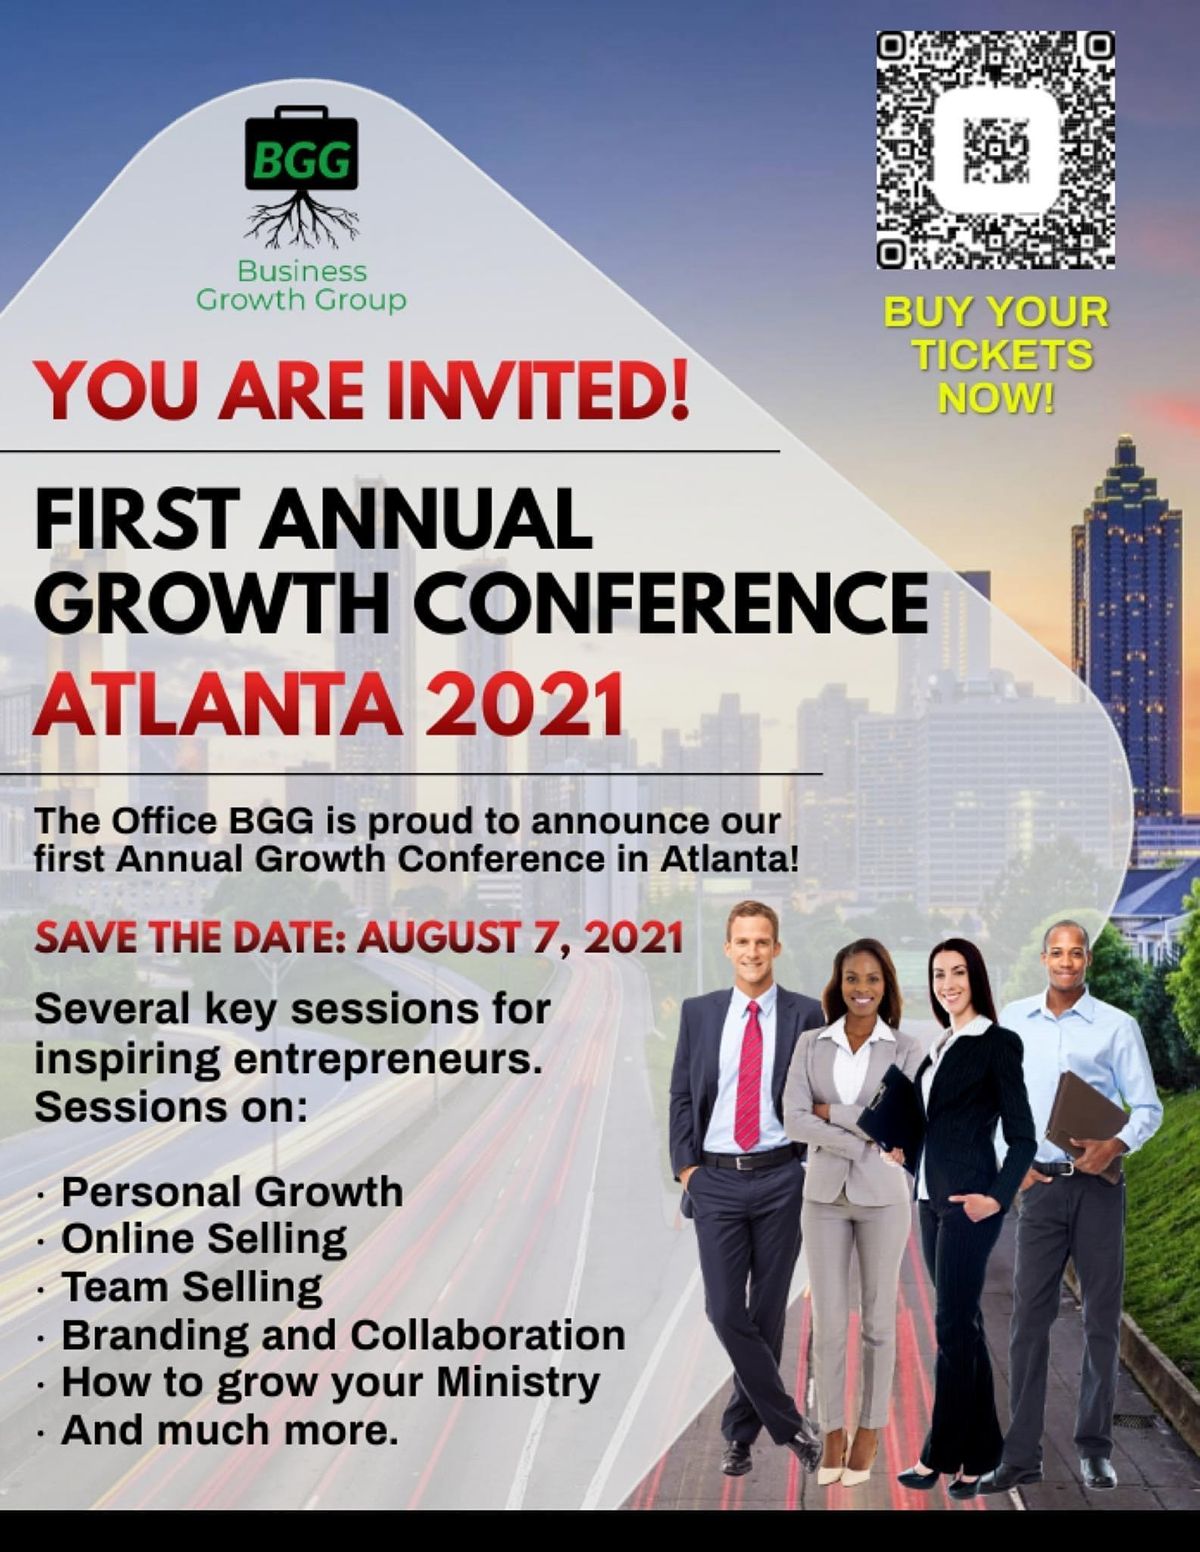 Business Growth Group Conference in Atlanta, GA